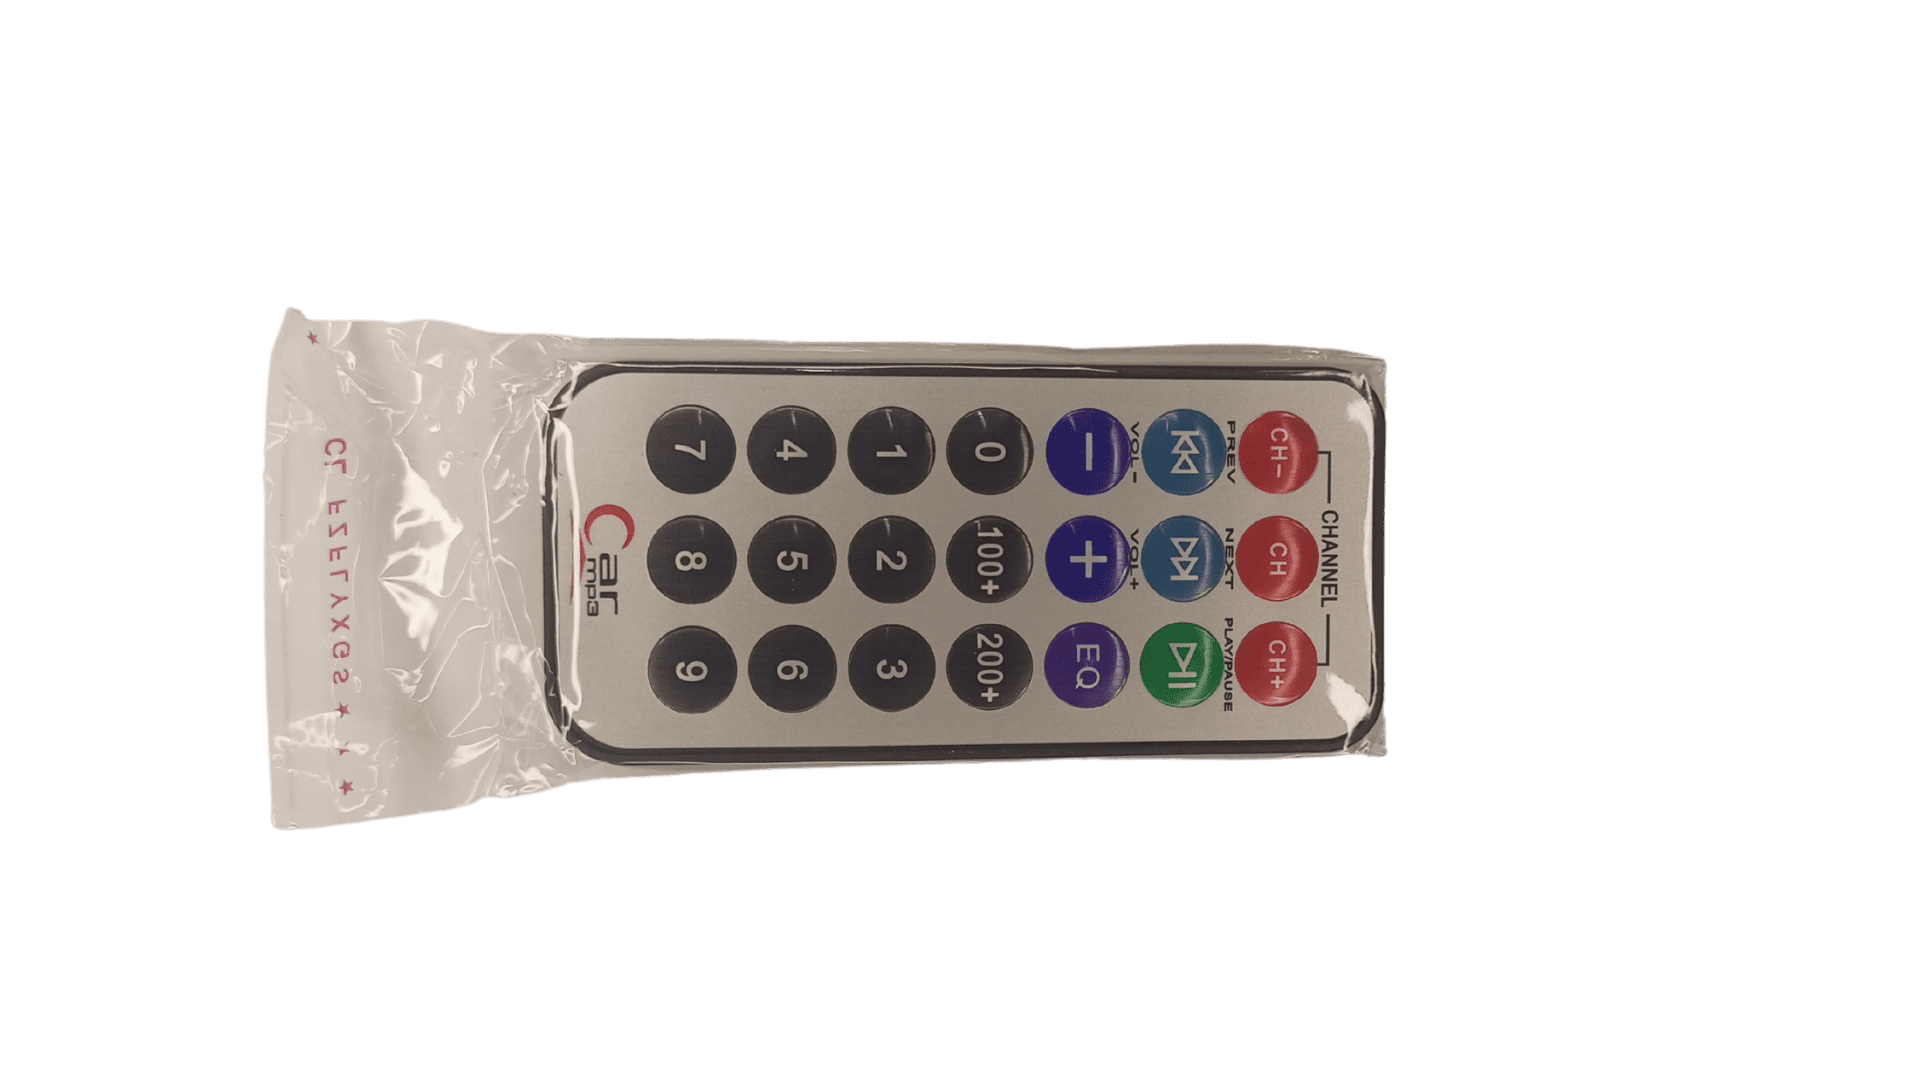 IR remote controller and receiver for aduino starter kit 